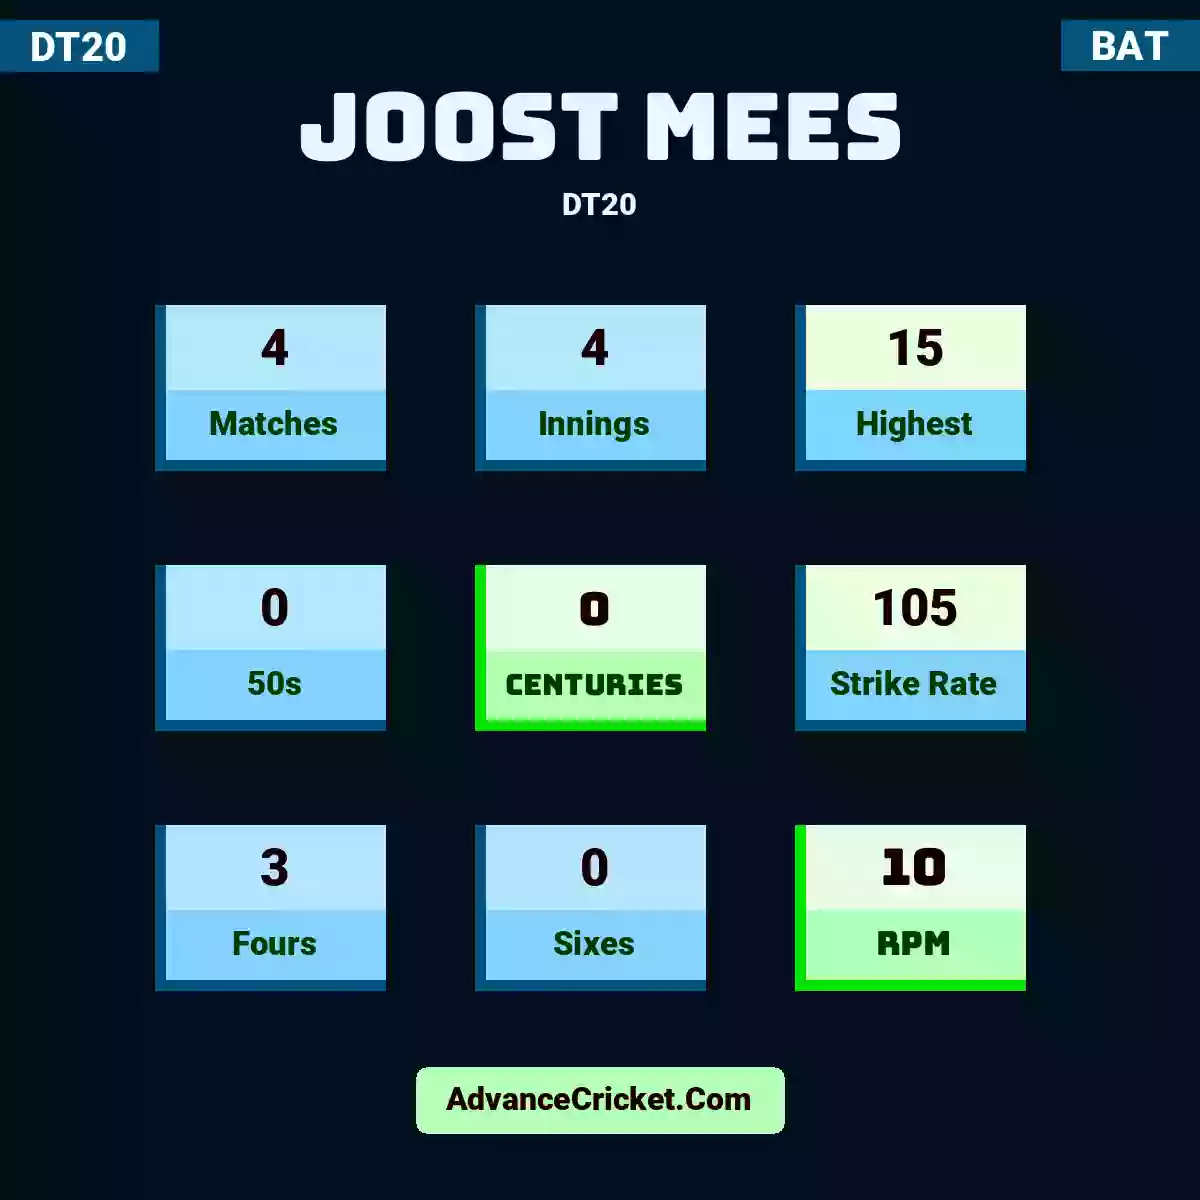 Joost Mees DT20 , Joost Mees played 4 matches, scored 15 runs as highest, 0 half-centuries, and 0 centuries, with a strike rate of 105. J.Mees hit 3 fours and 0 sixes, with an RPM of 10.